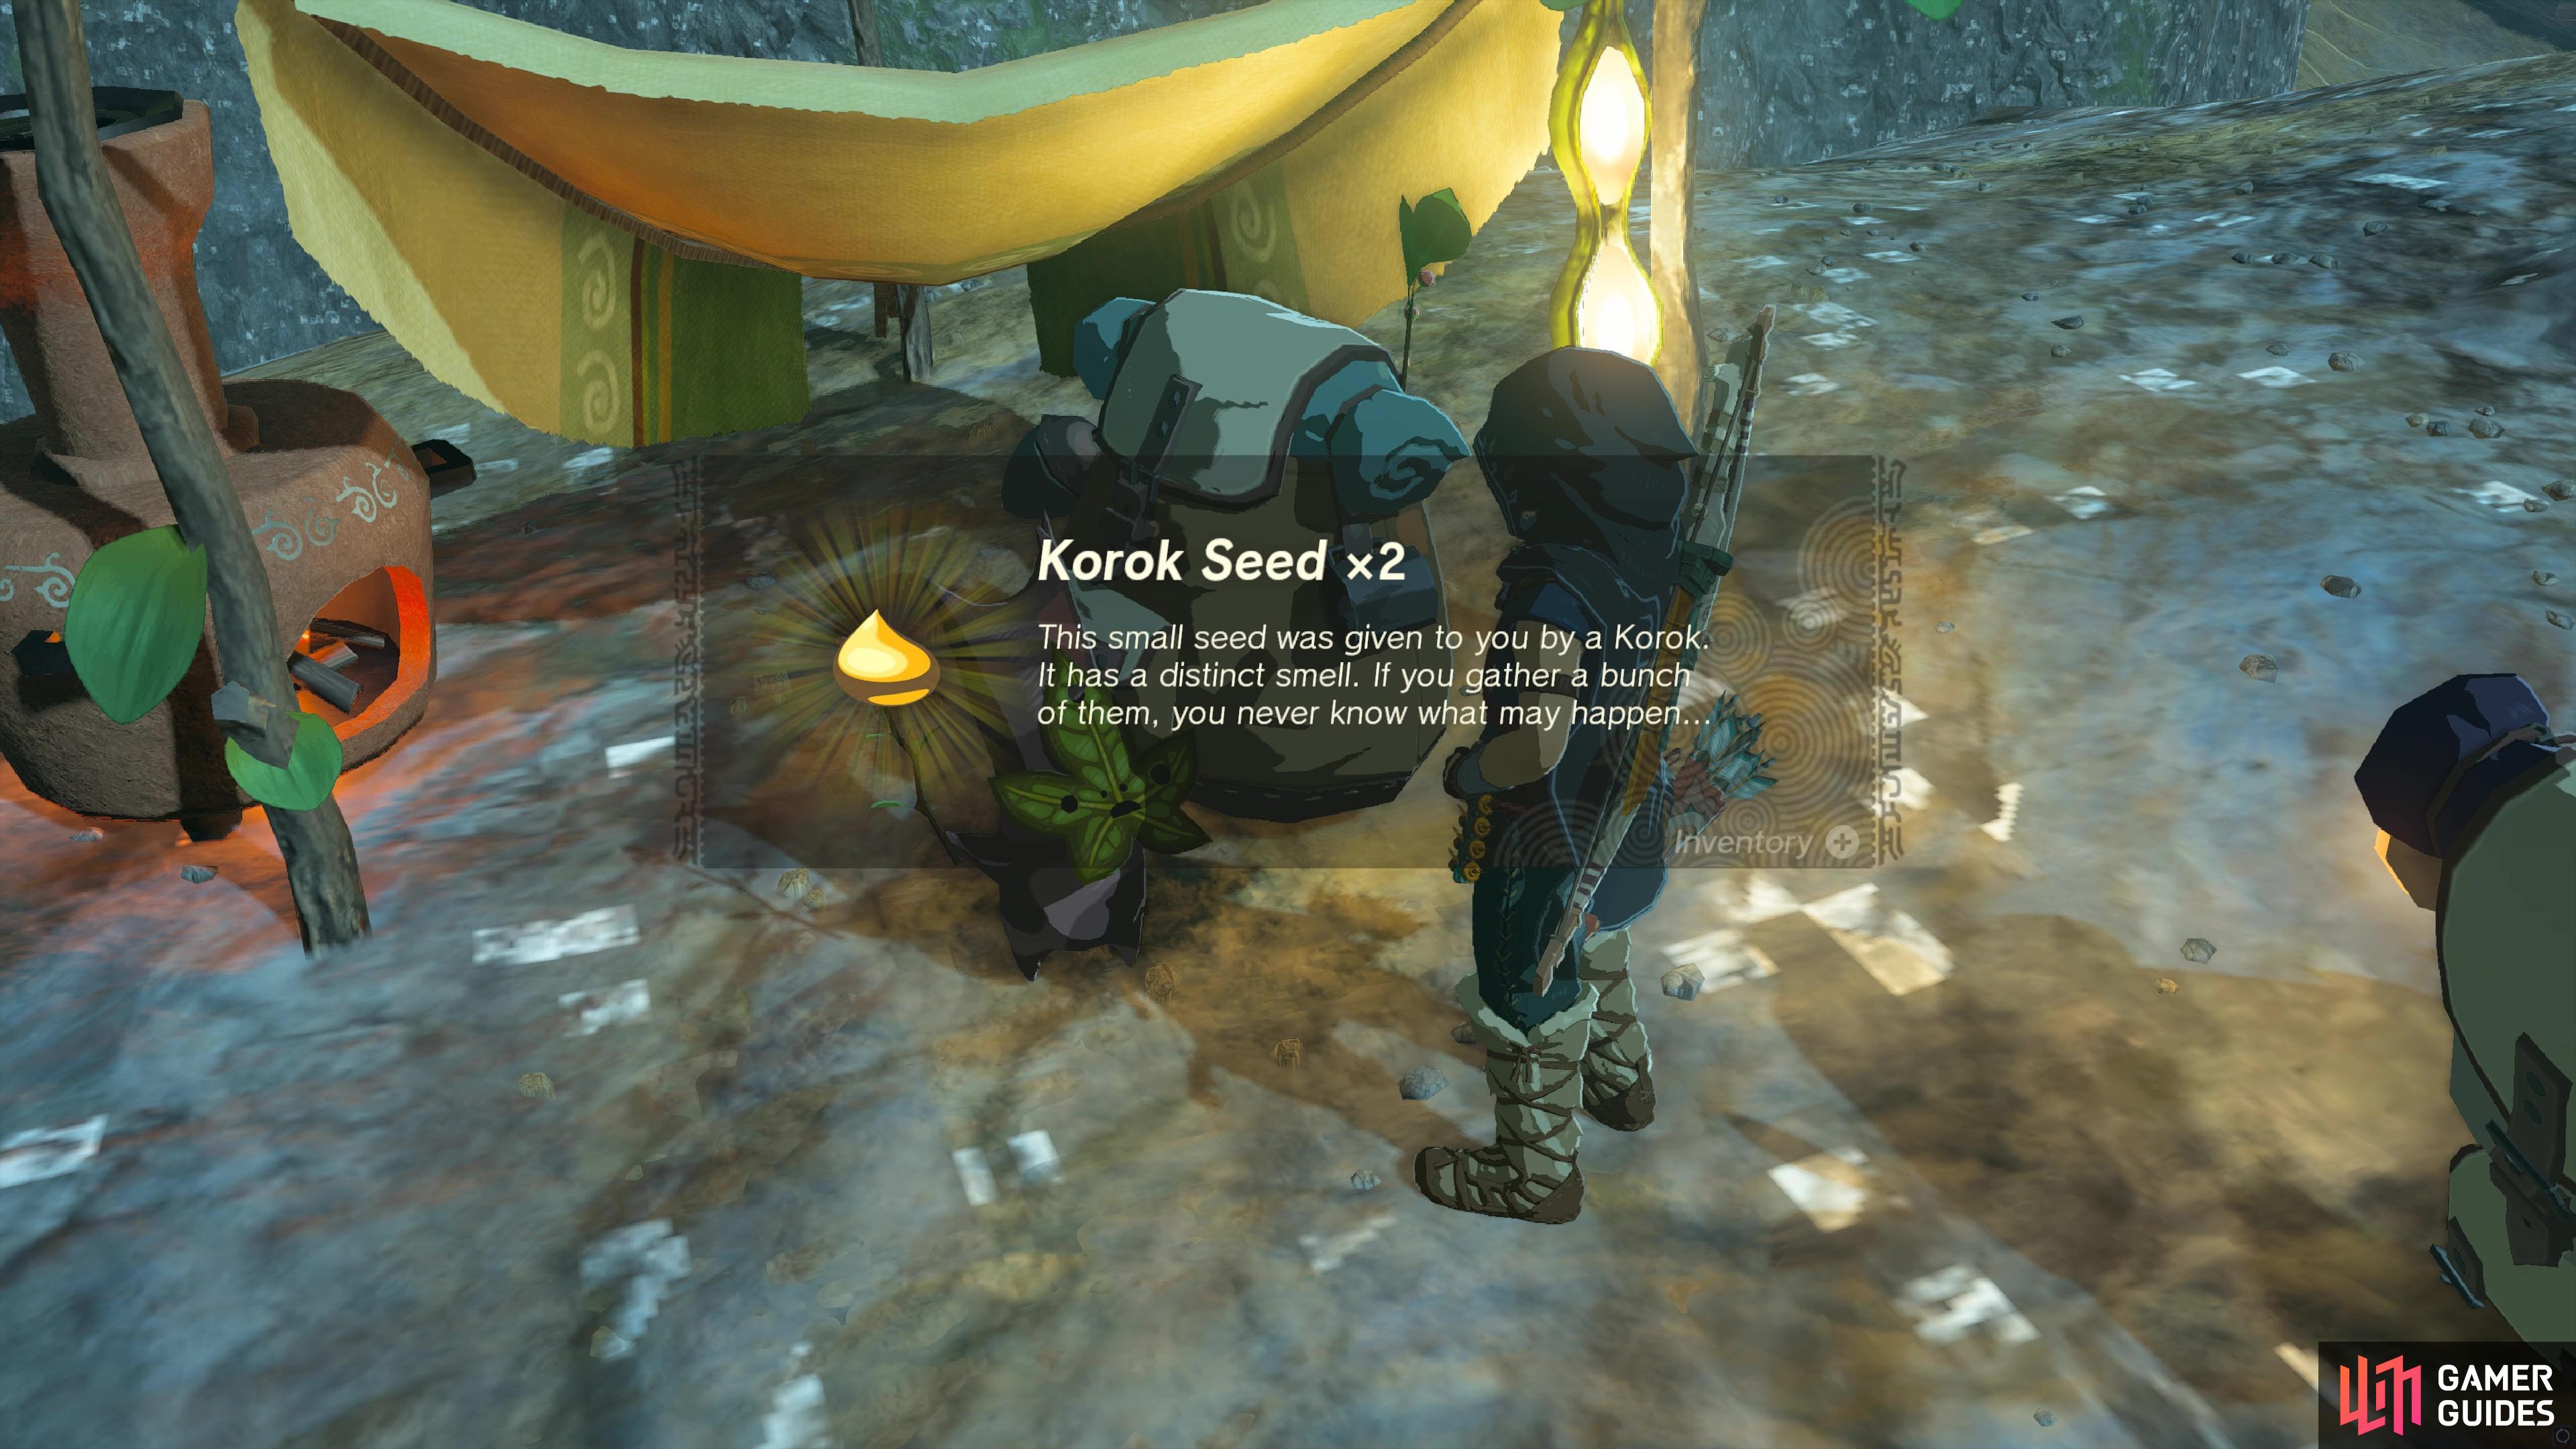 You can obtain Korok Seeds by completing puzzles.